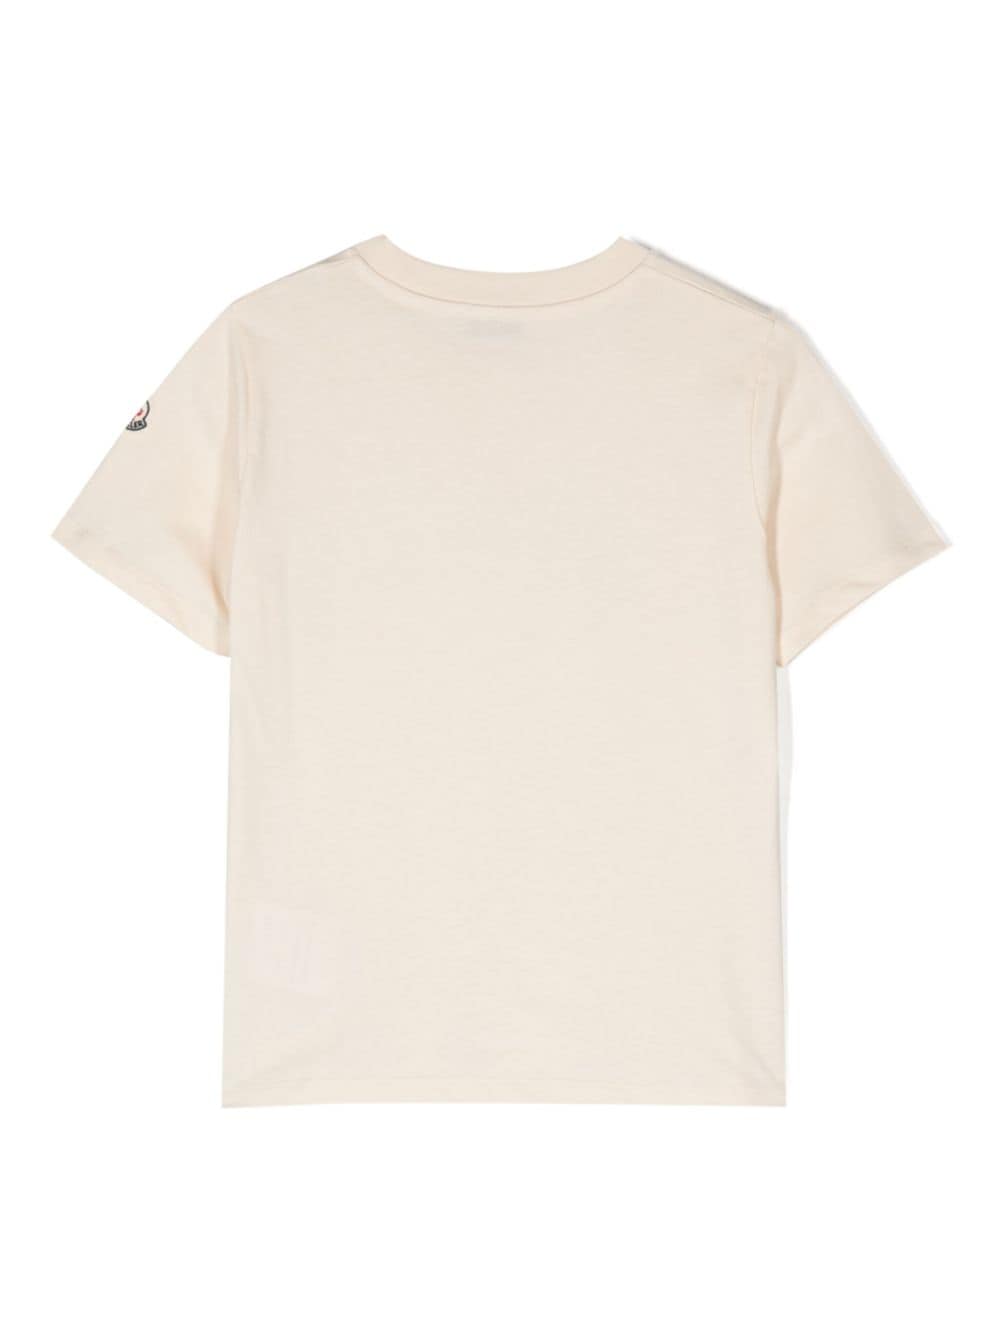 Beige t-shirt for girls with logo